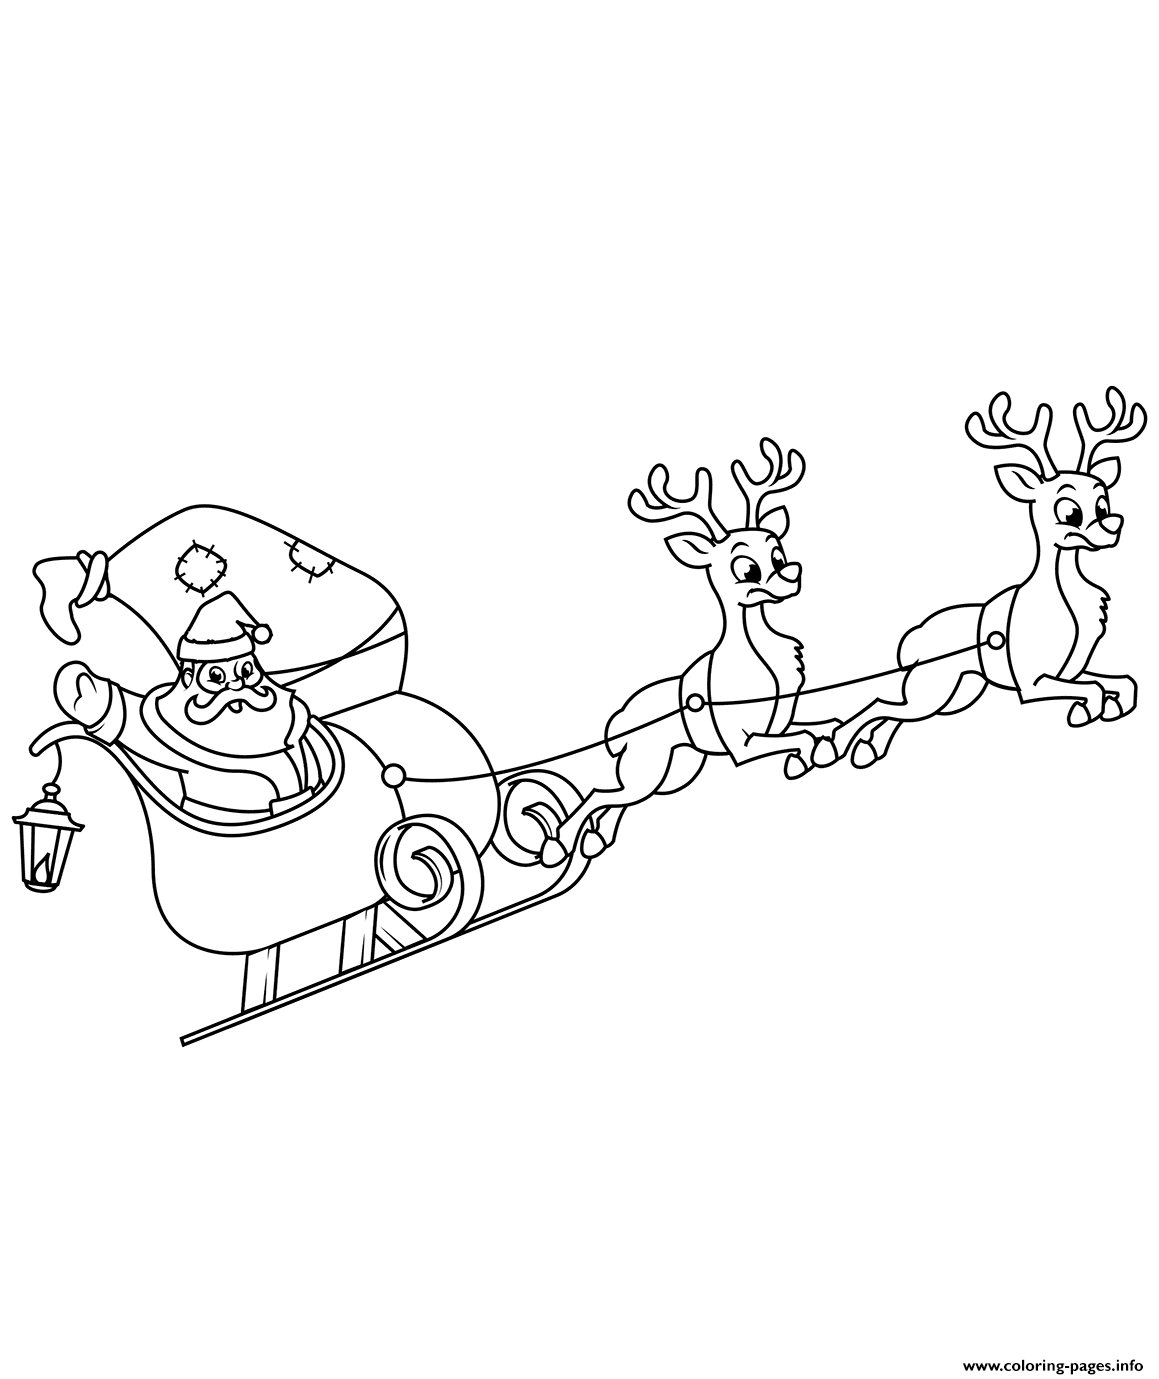 Santa Claus In Sleigh Coloring Page Santa Claus Riding His Sleigh Christmas Coloring Pages Printable